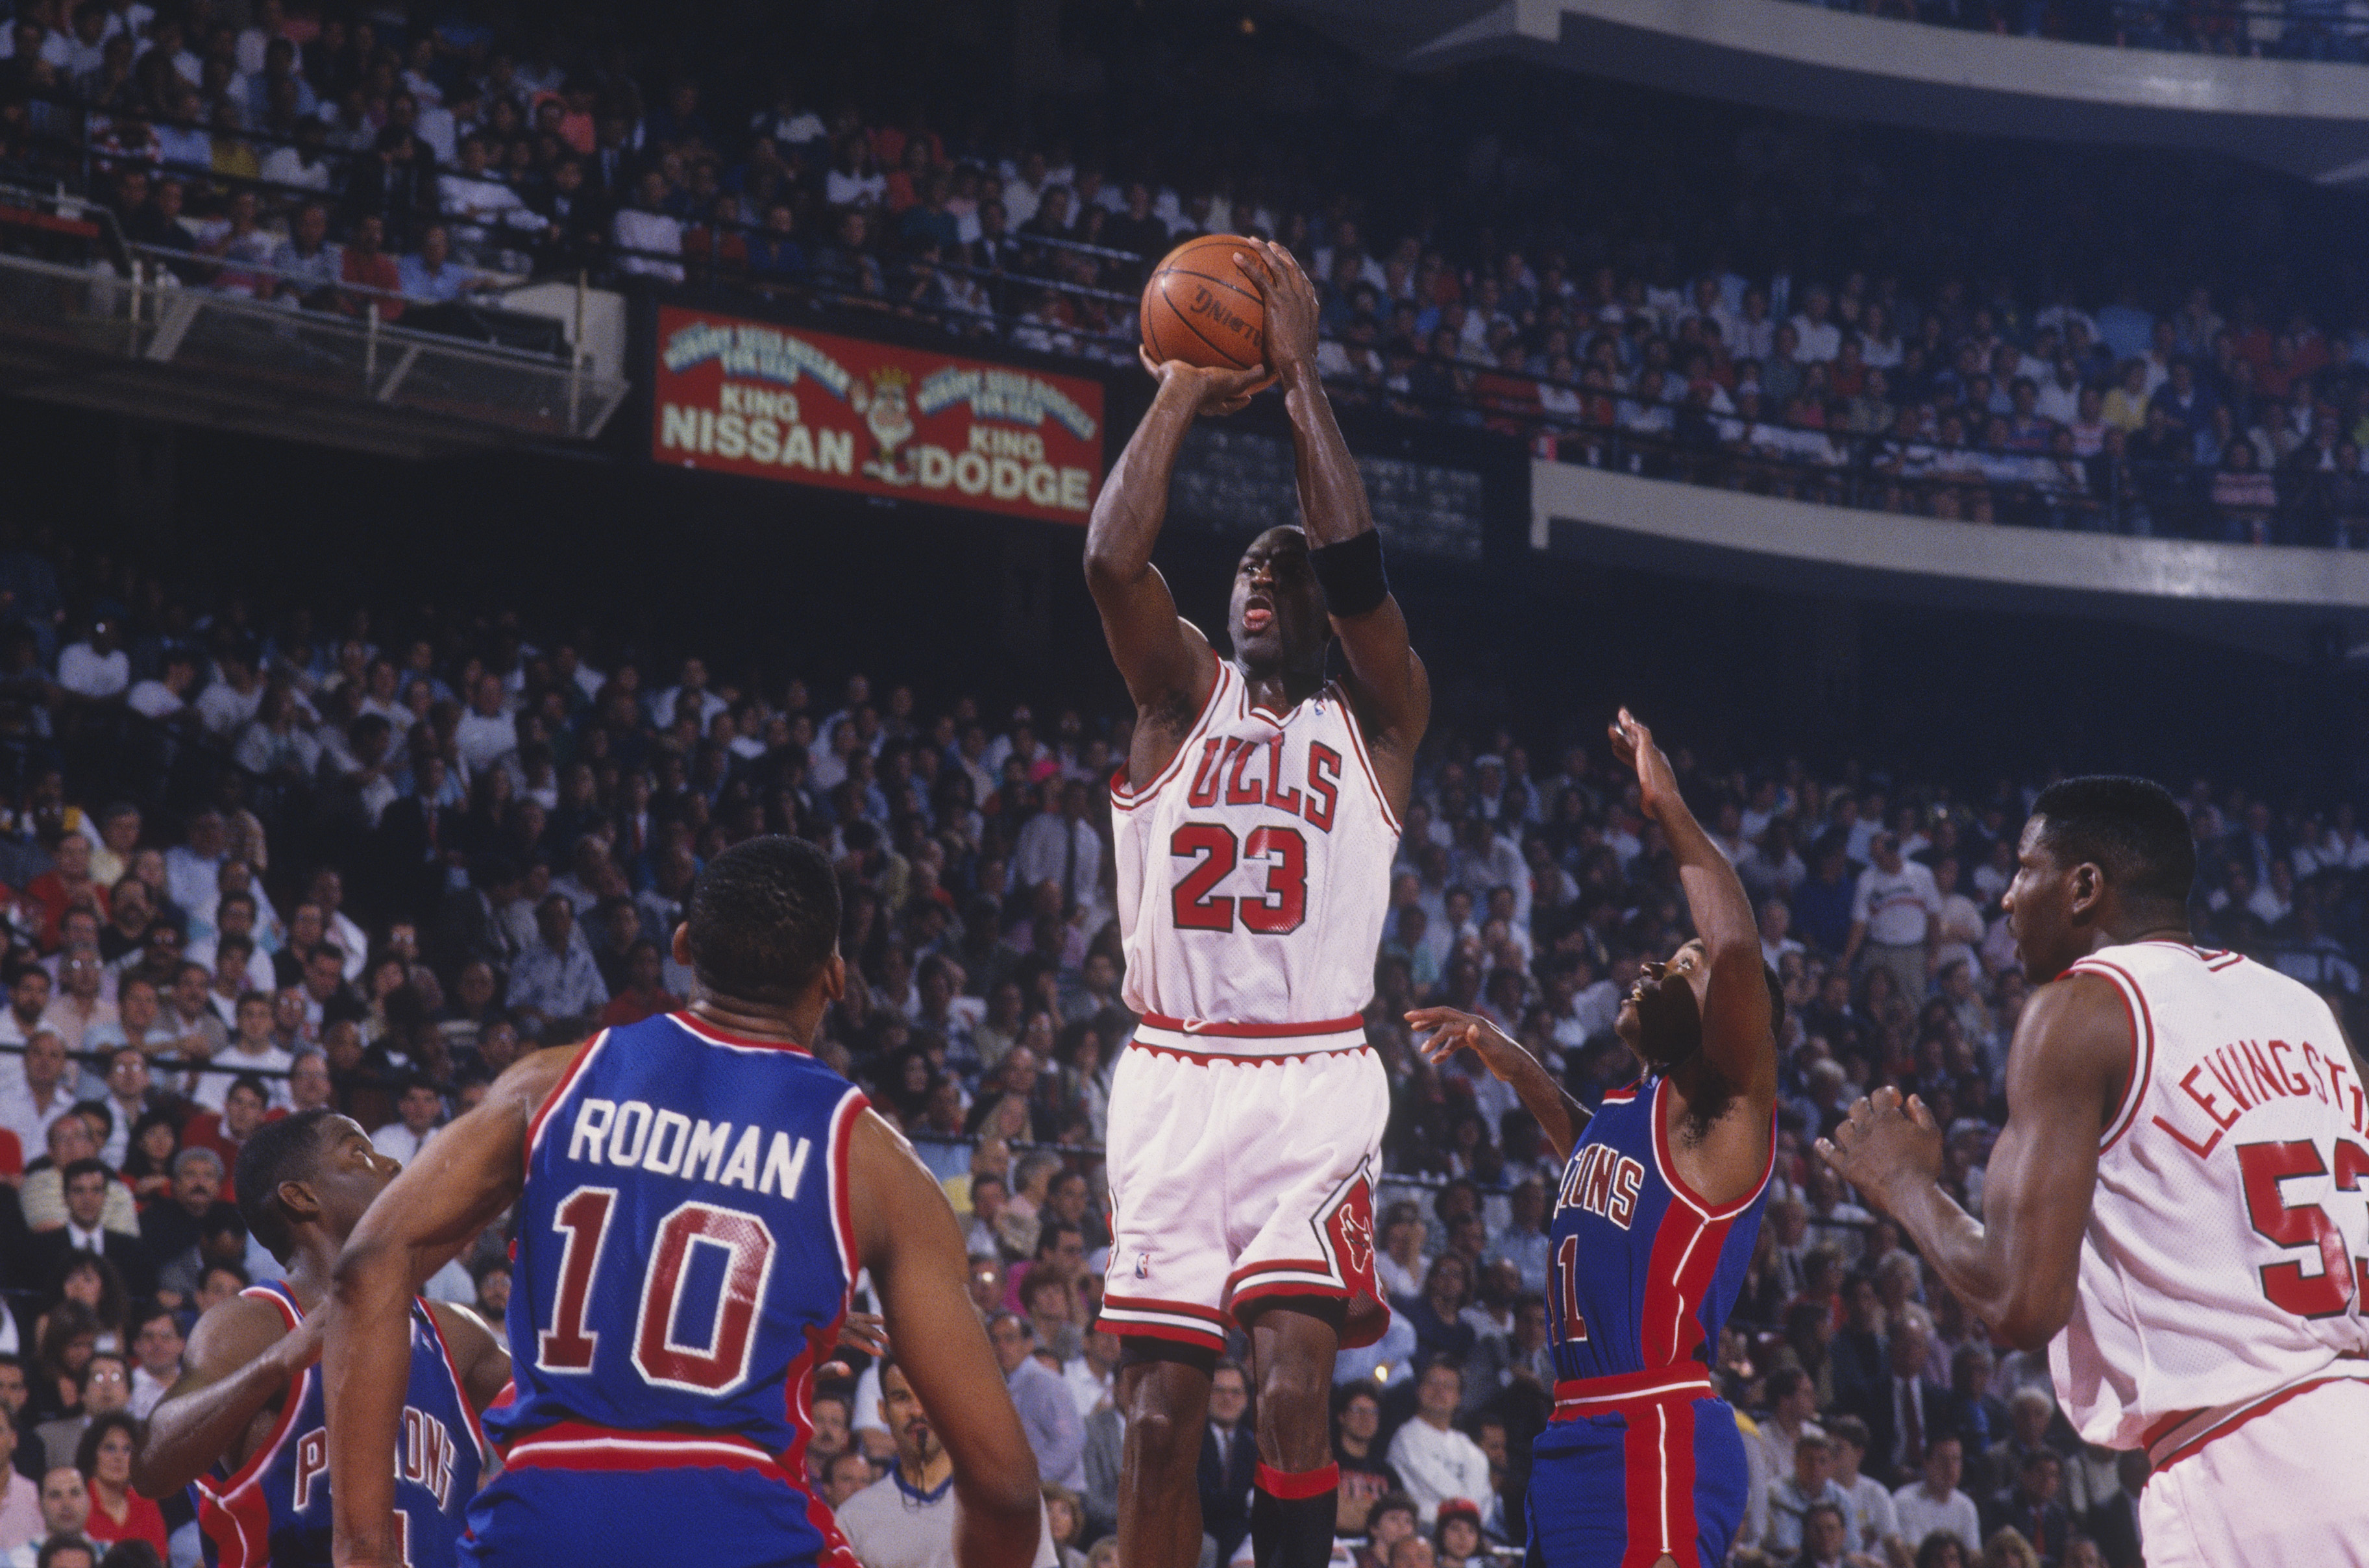 Michael Jordan of the Chicago Bulls jumps to shoot a basket against the Detroit Pistons